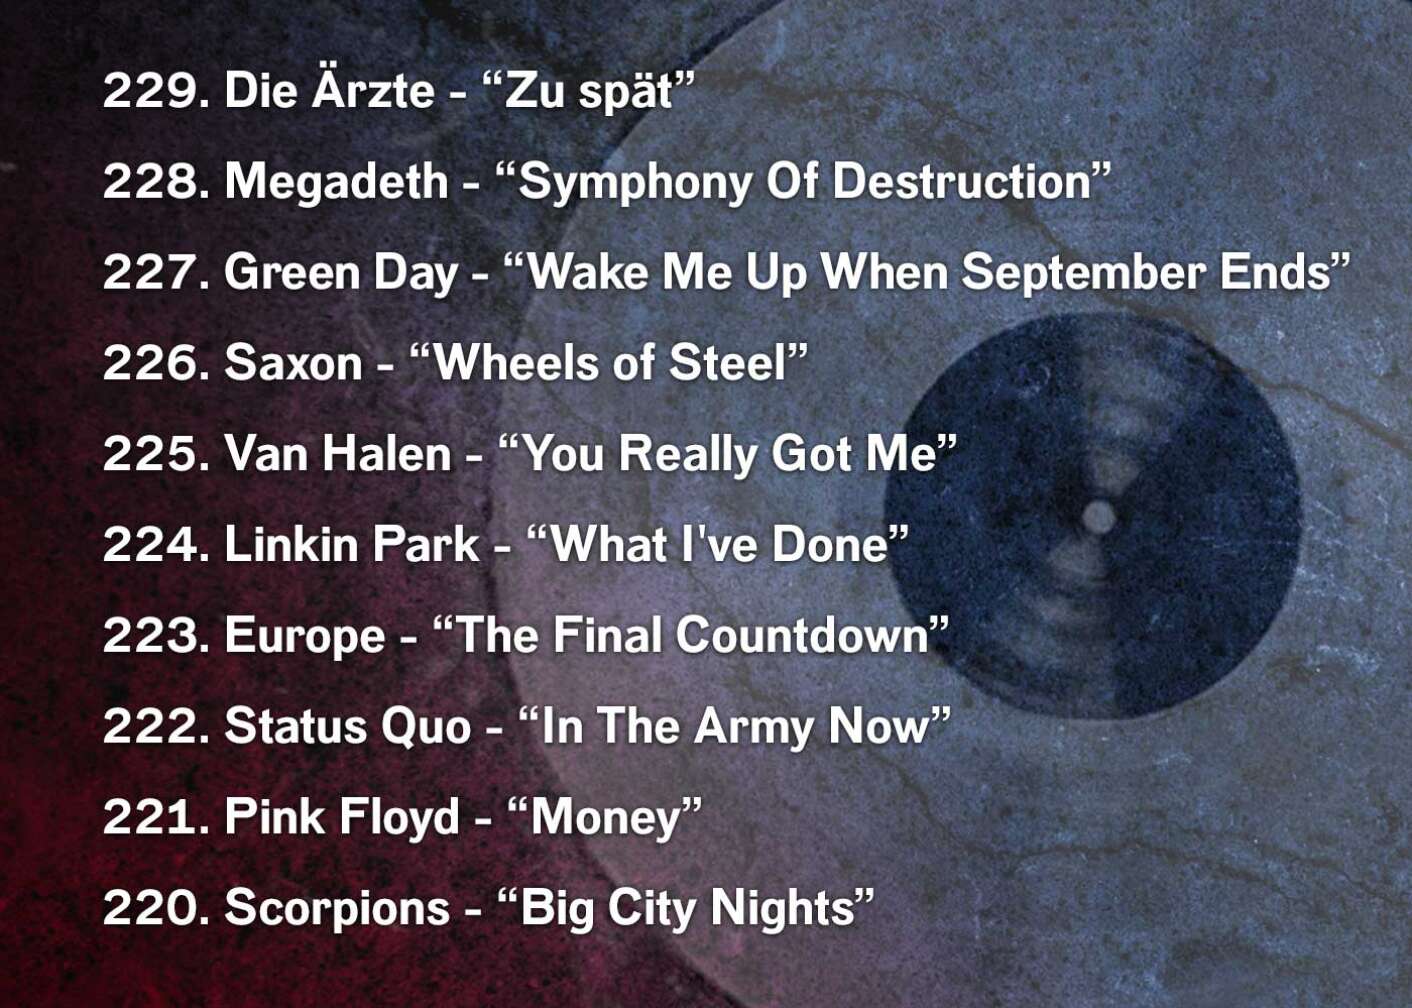 229. Die Ärzte - “Zu spät” 228. Megadeth - “Symphony Of Destruction” 227. Green Day - “Wake Me Up When September Ends” 226. Saxon - “Wheels of Steel” 225. Van Halen - “You Really Got Me” 224. Linkin Park - “What I've Done” 223. Europe - “The Final Countdown” 222. Status Quo - “In The Army Now” 221. Pink Floyd - “Money” 220. Scorpions - “Big City Nights”